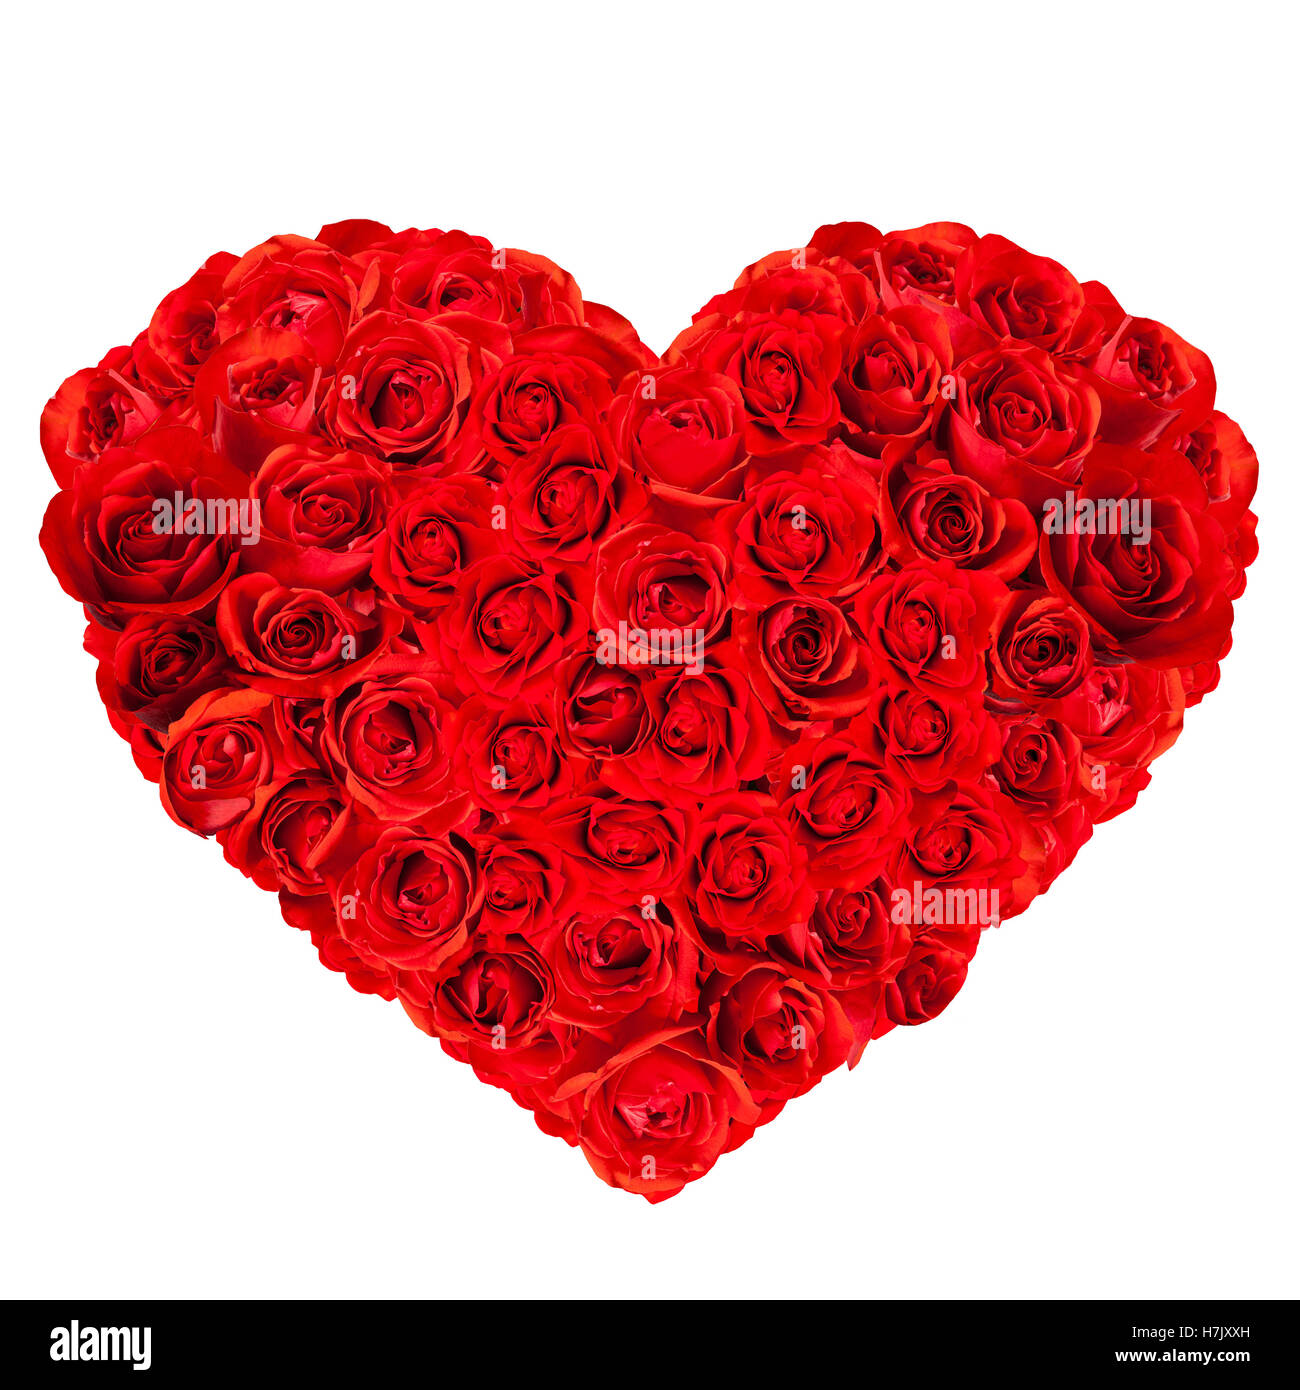 Red roses arranged into a heart shape for special occasions Stock Photo